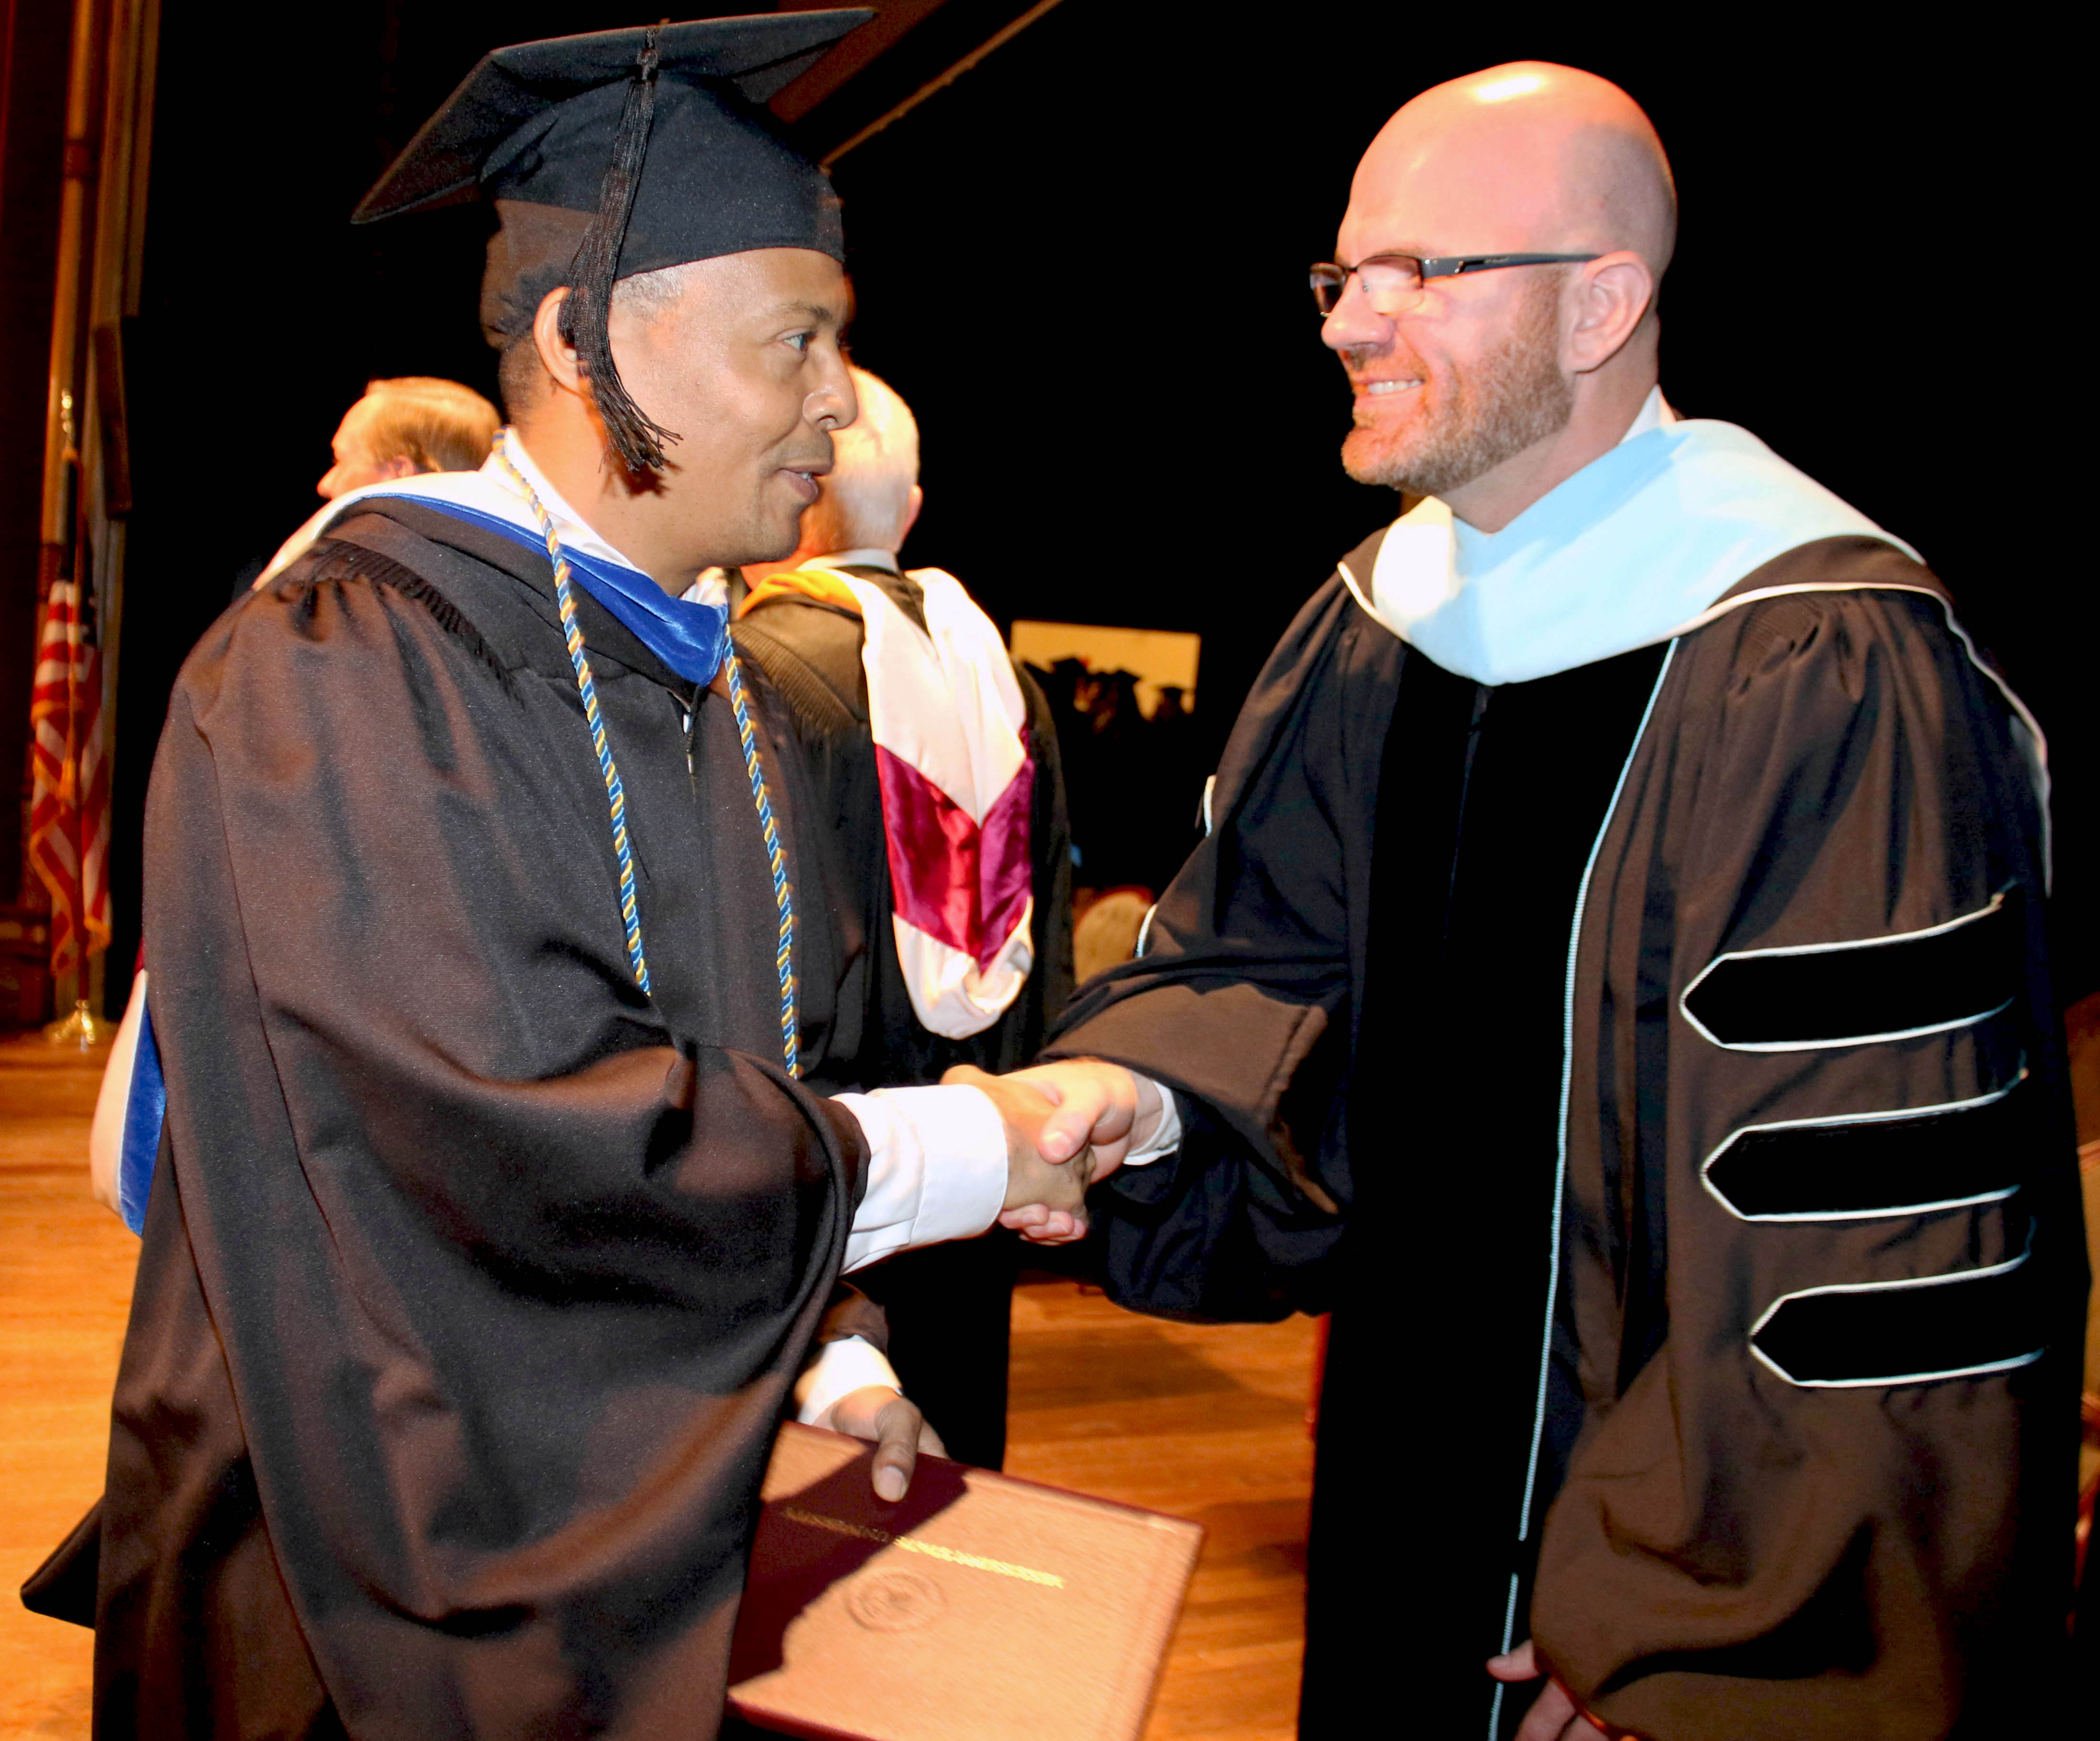 Dr. Cruse shakes hands with recent graduate in cap and gown at commencement ceremonies.  